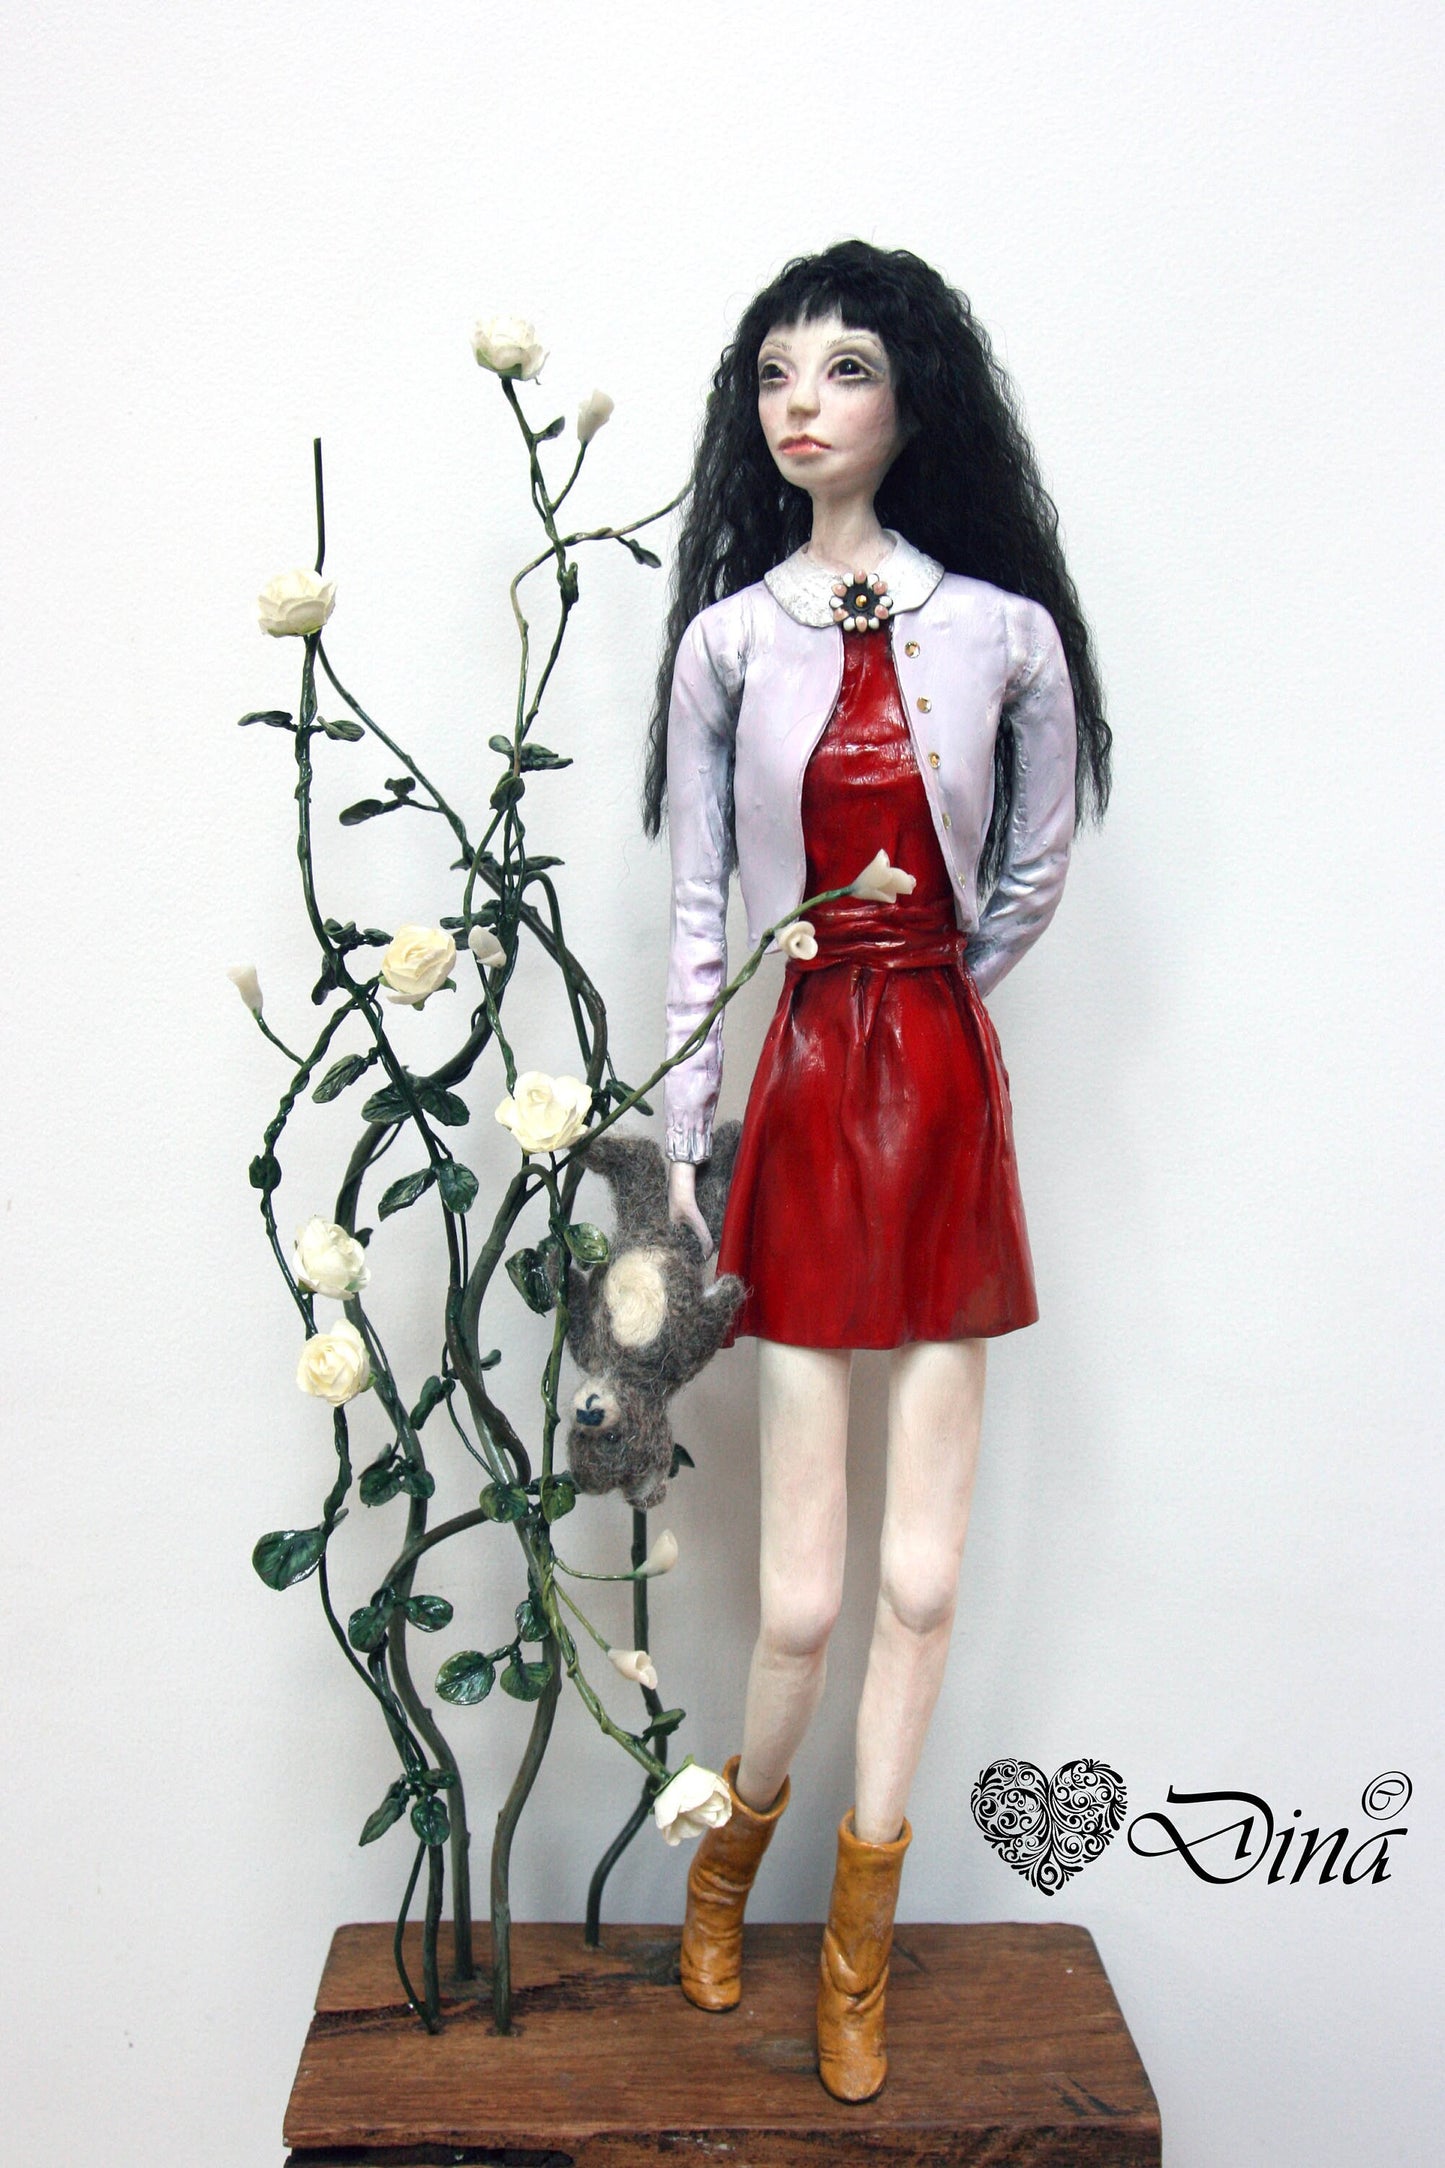 Fantasy art doll - Collectible handmade doll - stone clay sculpture and mixed media